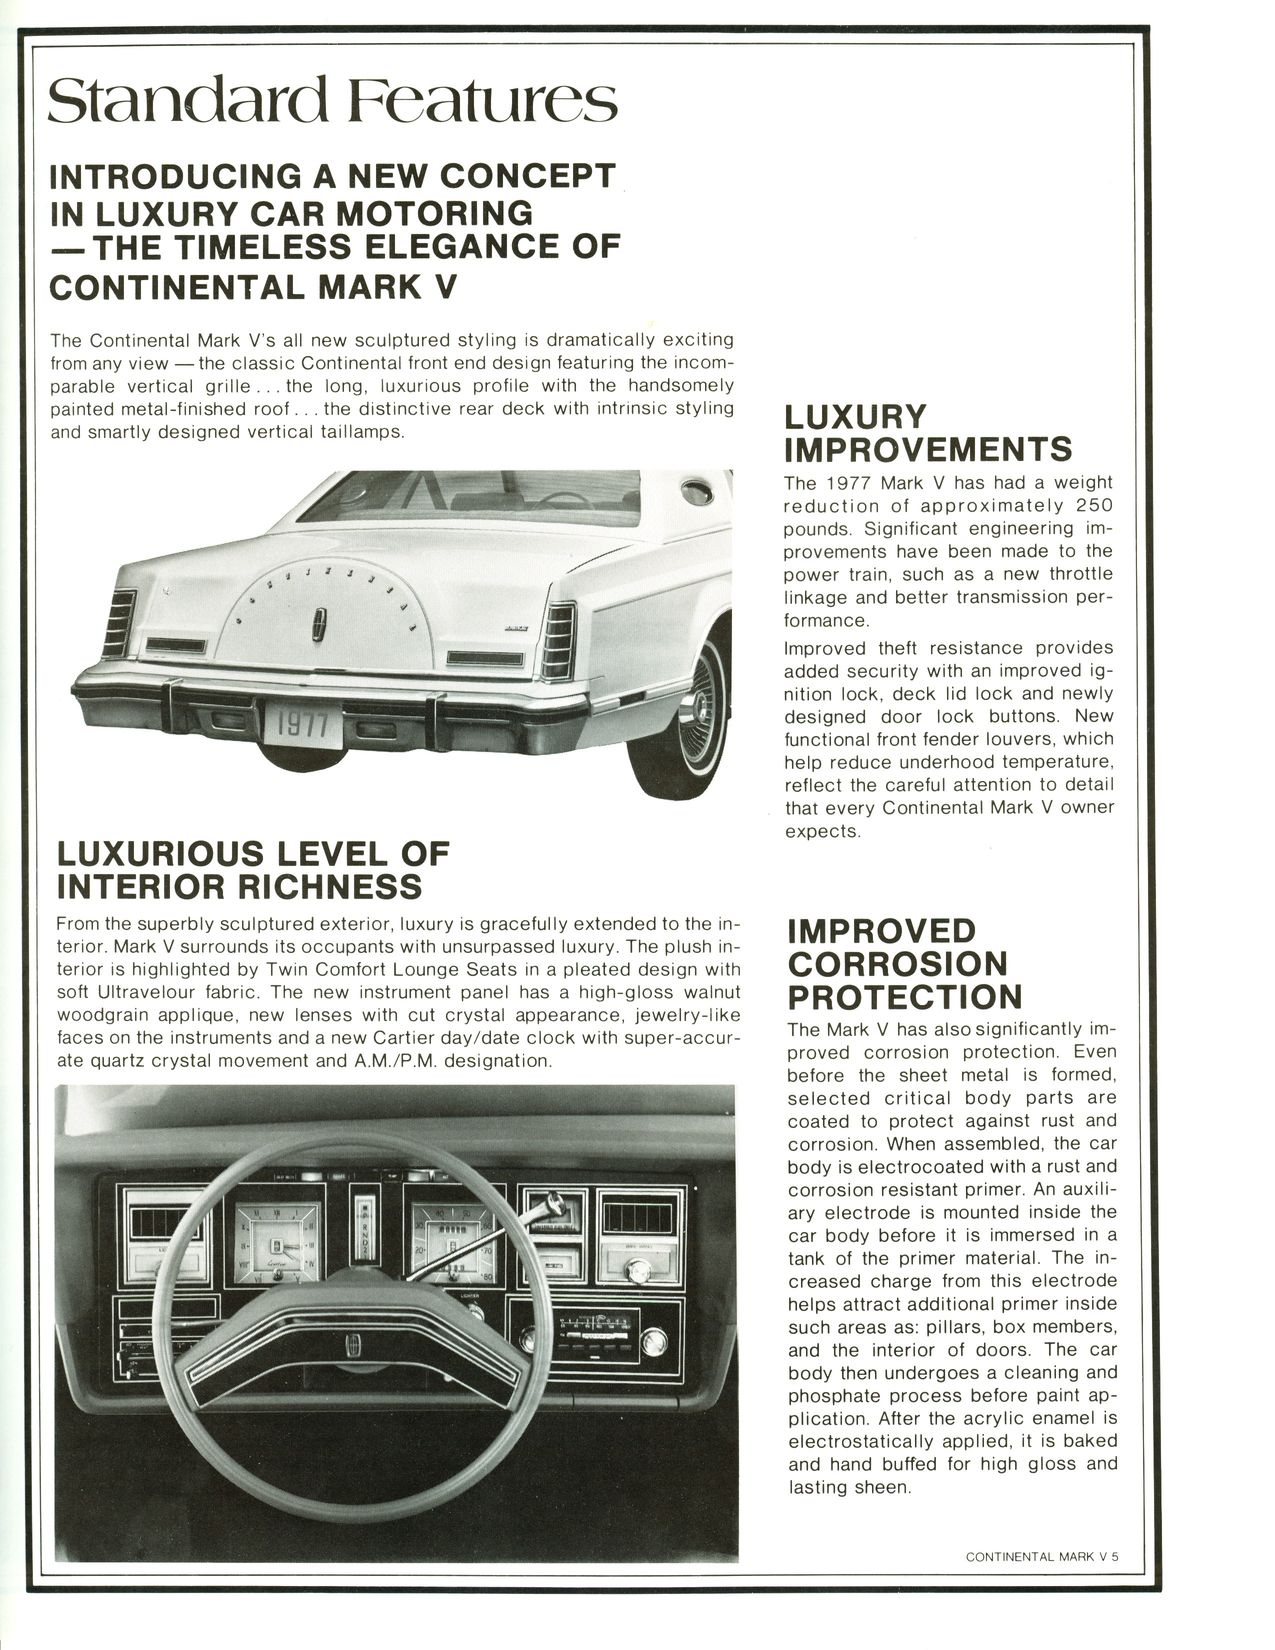 1977 Lincoln Continental Mark V Product Facts Book Page 28